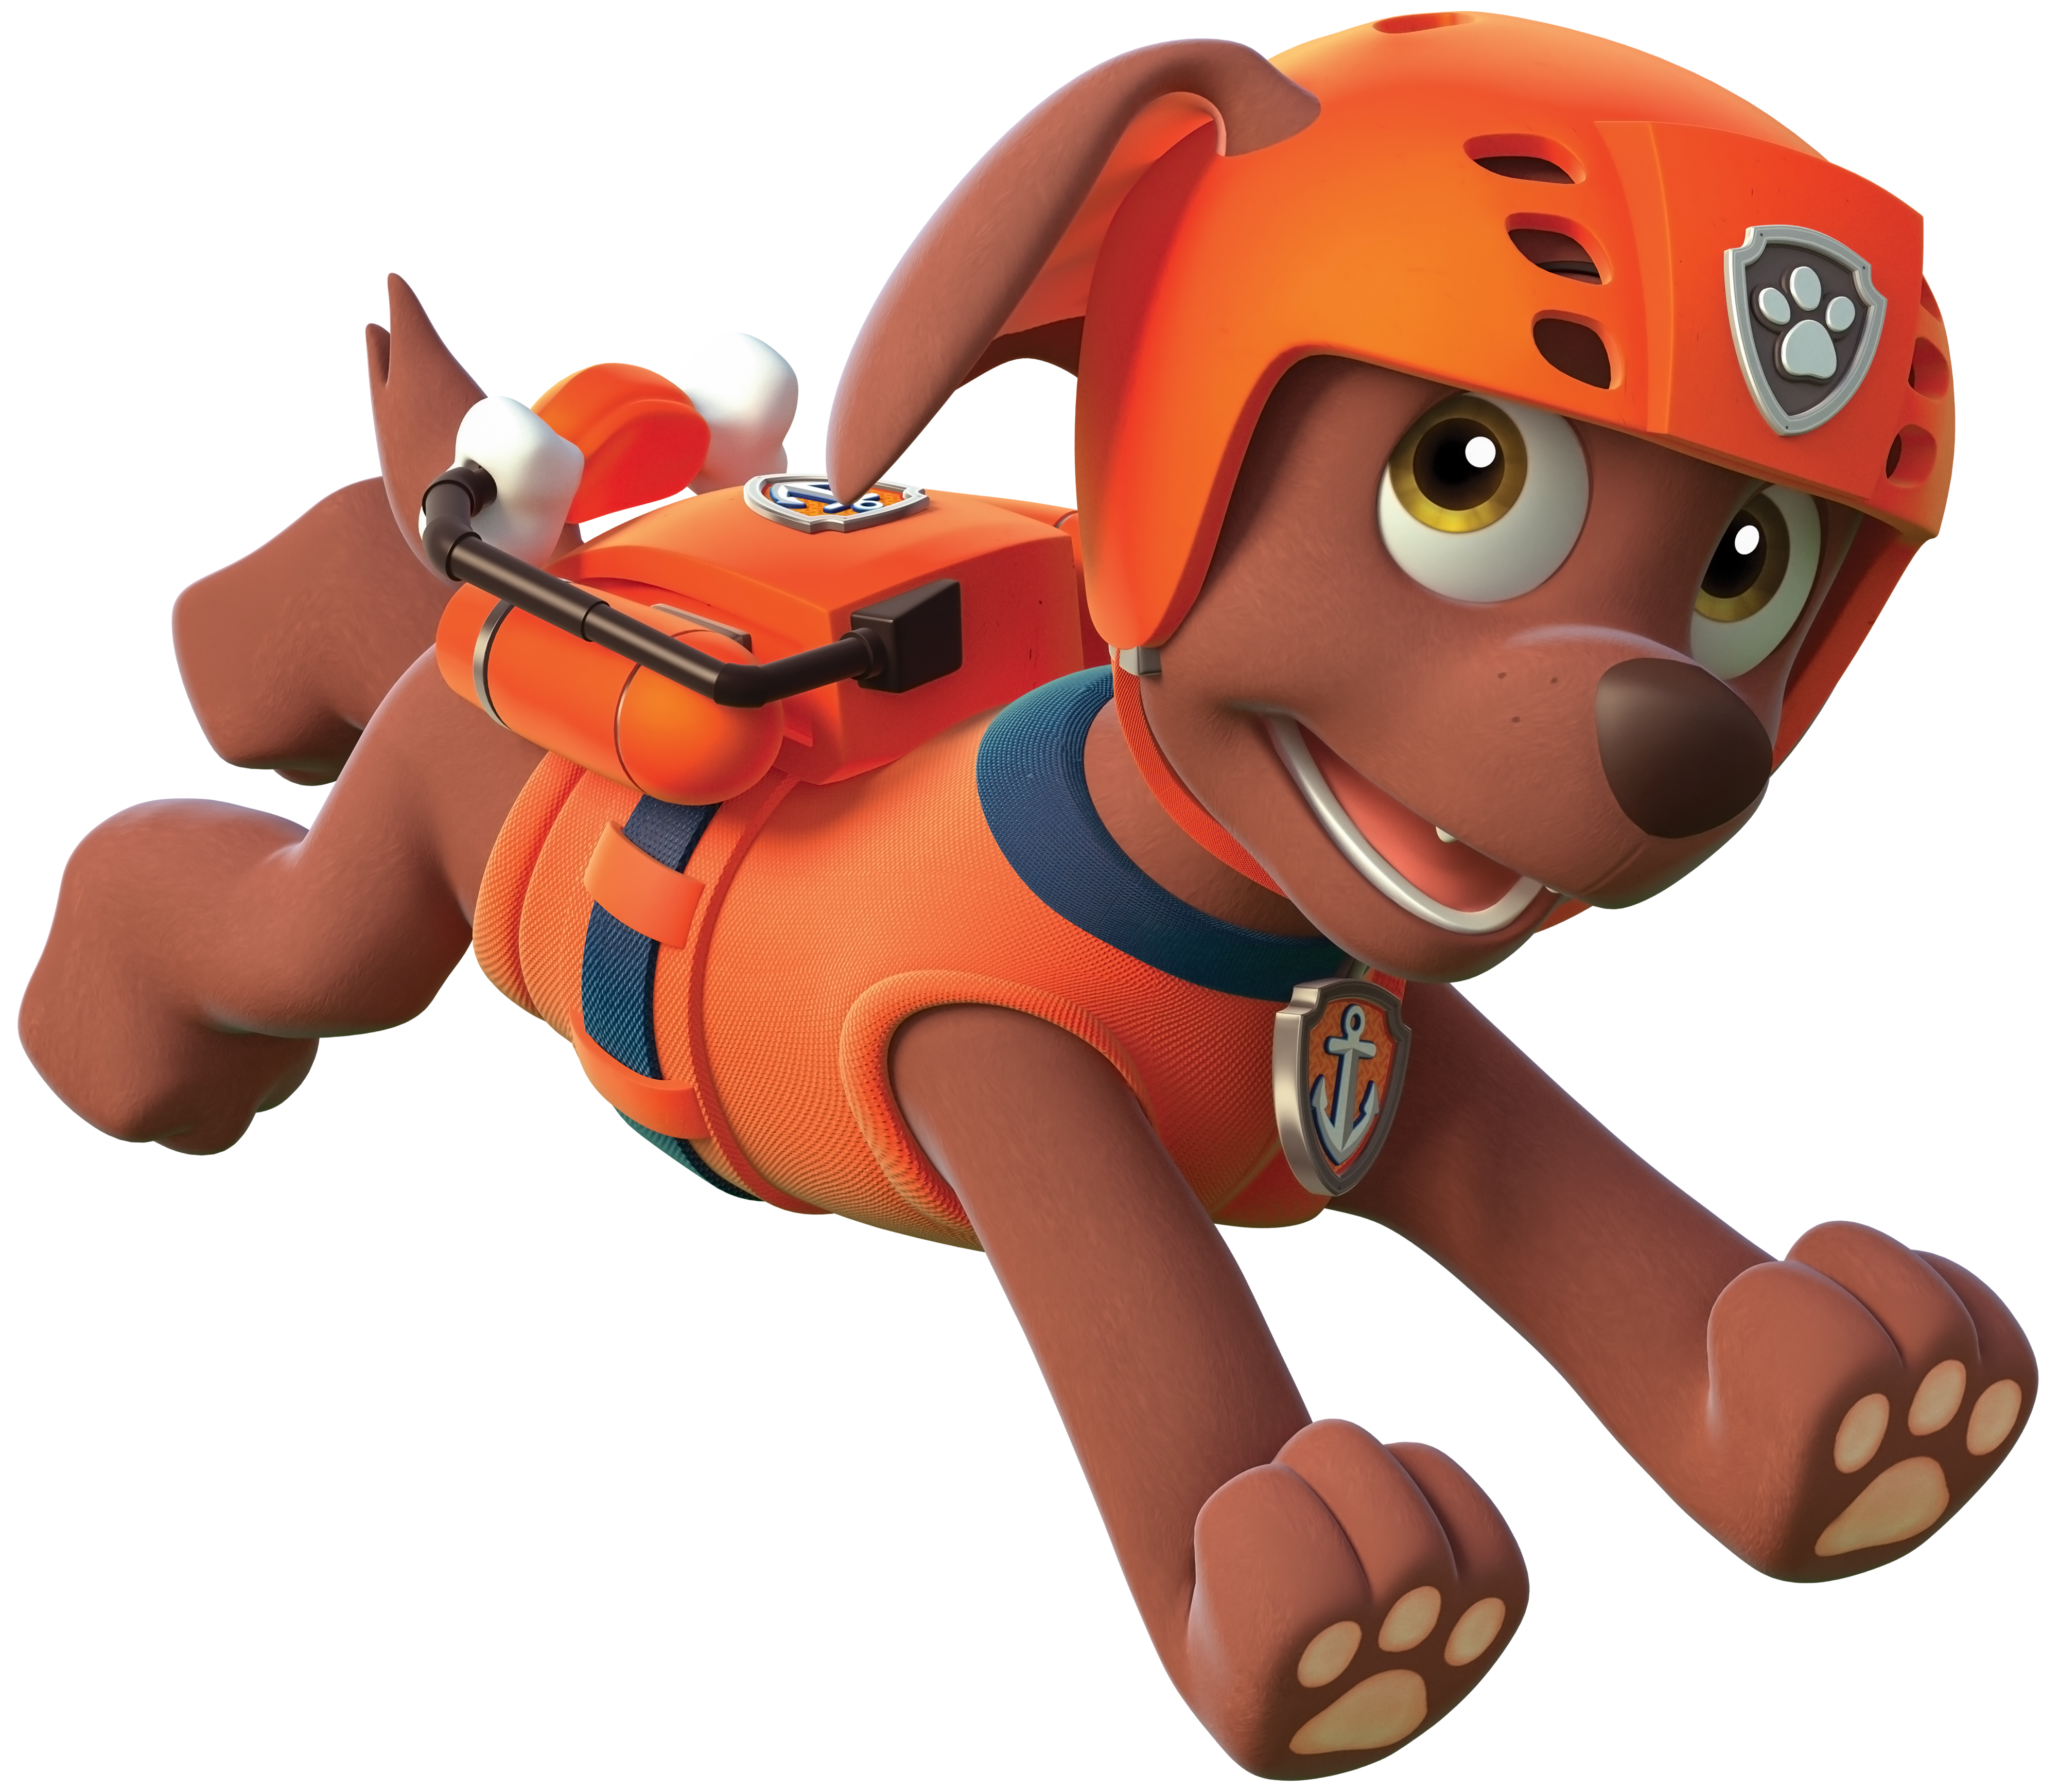 PAW Patrol Zuma PNG Cartoon Image​  Gallery Yopriceville - High-Quality  Free Images and Transparent PNG Clipart